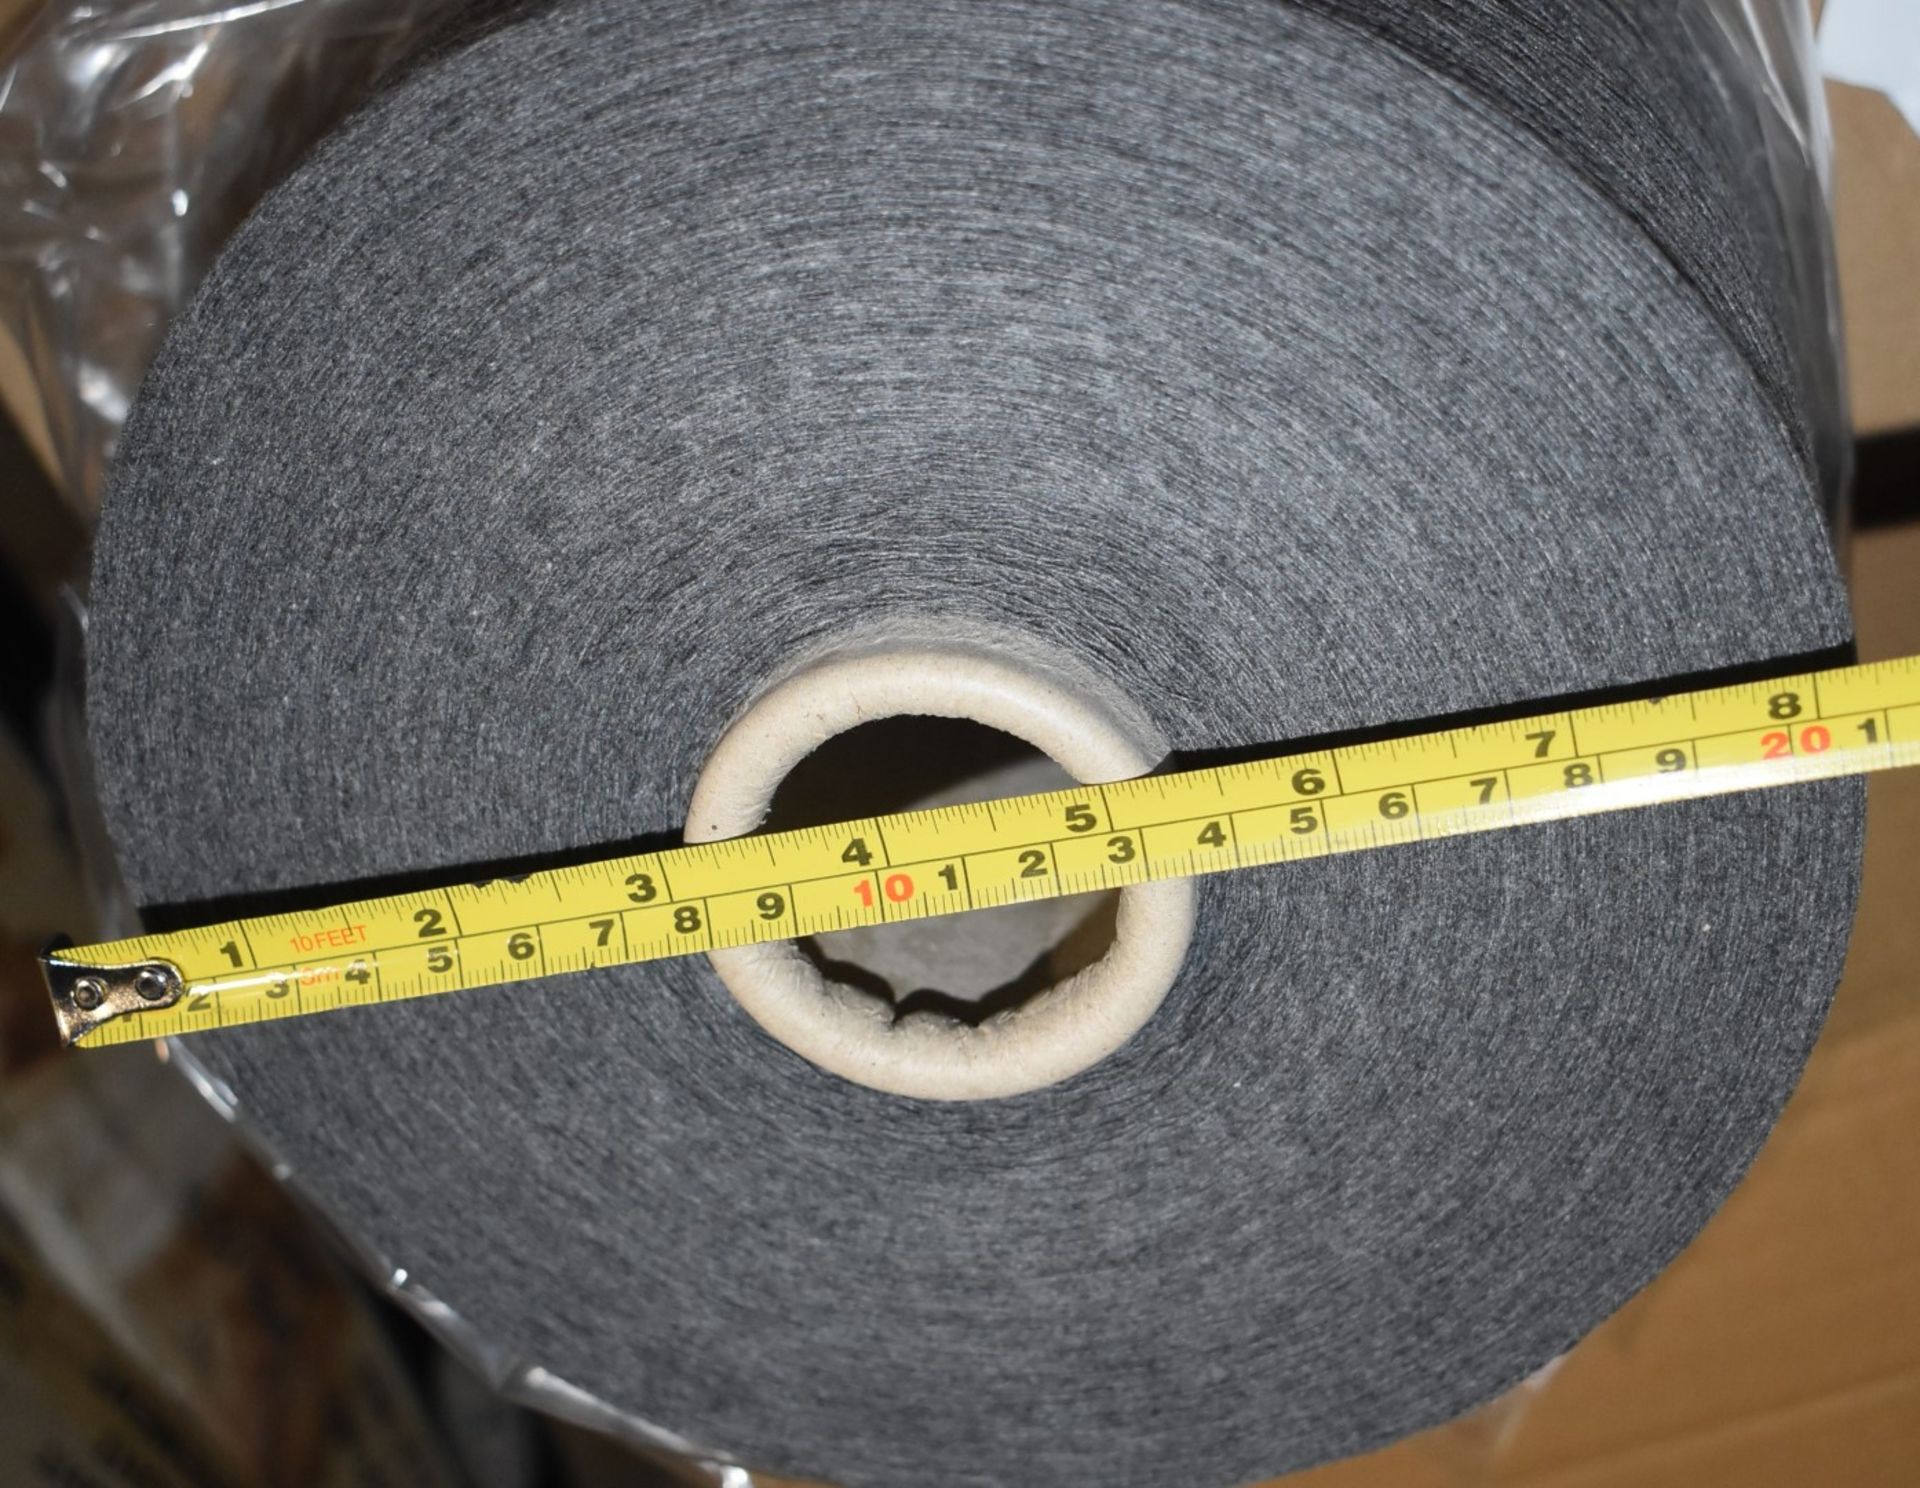 18 x Cones of 1/13 MicroCotton Knitting Yarn - Mid Grey - Approx Weight: 2,500g - New Stock ABL Yarn - Image 11 of 16